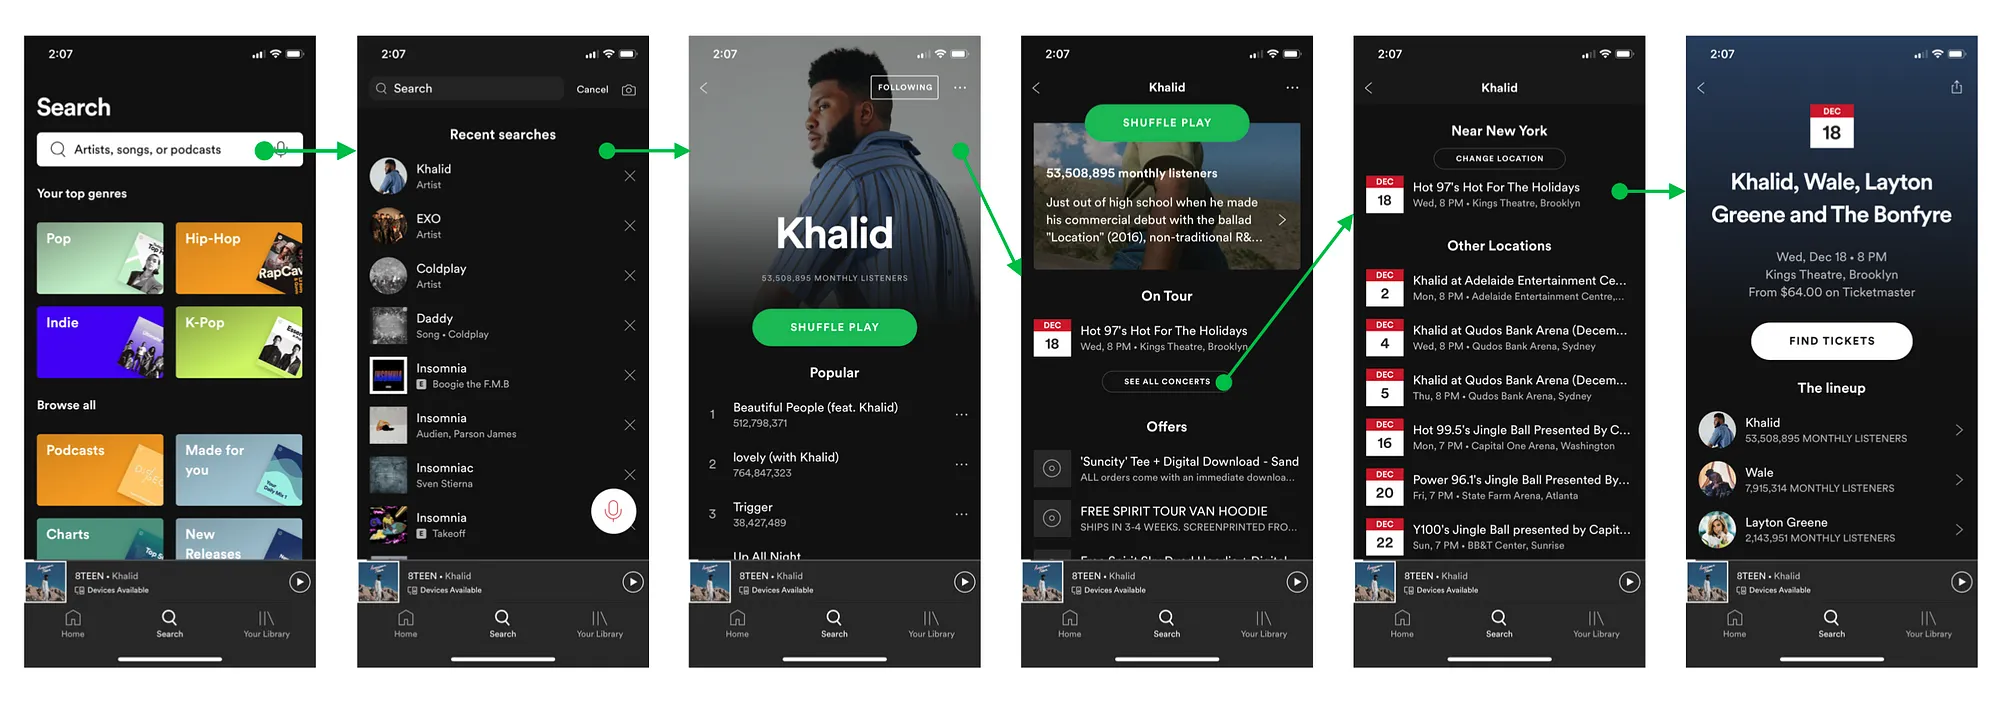 The Spotify concert recommendation user-flow.